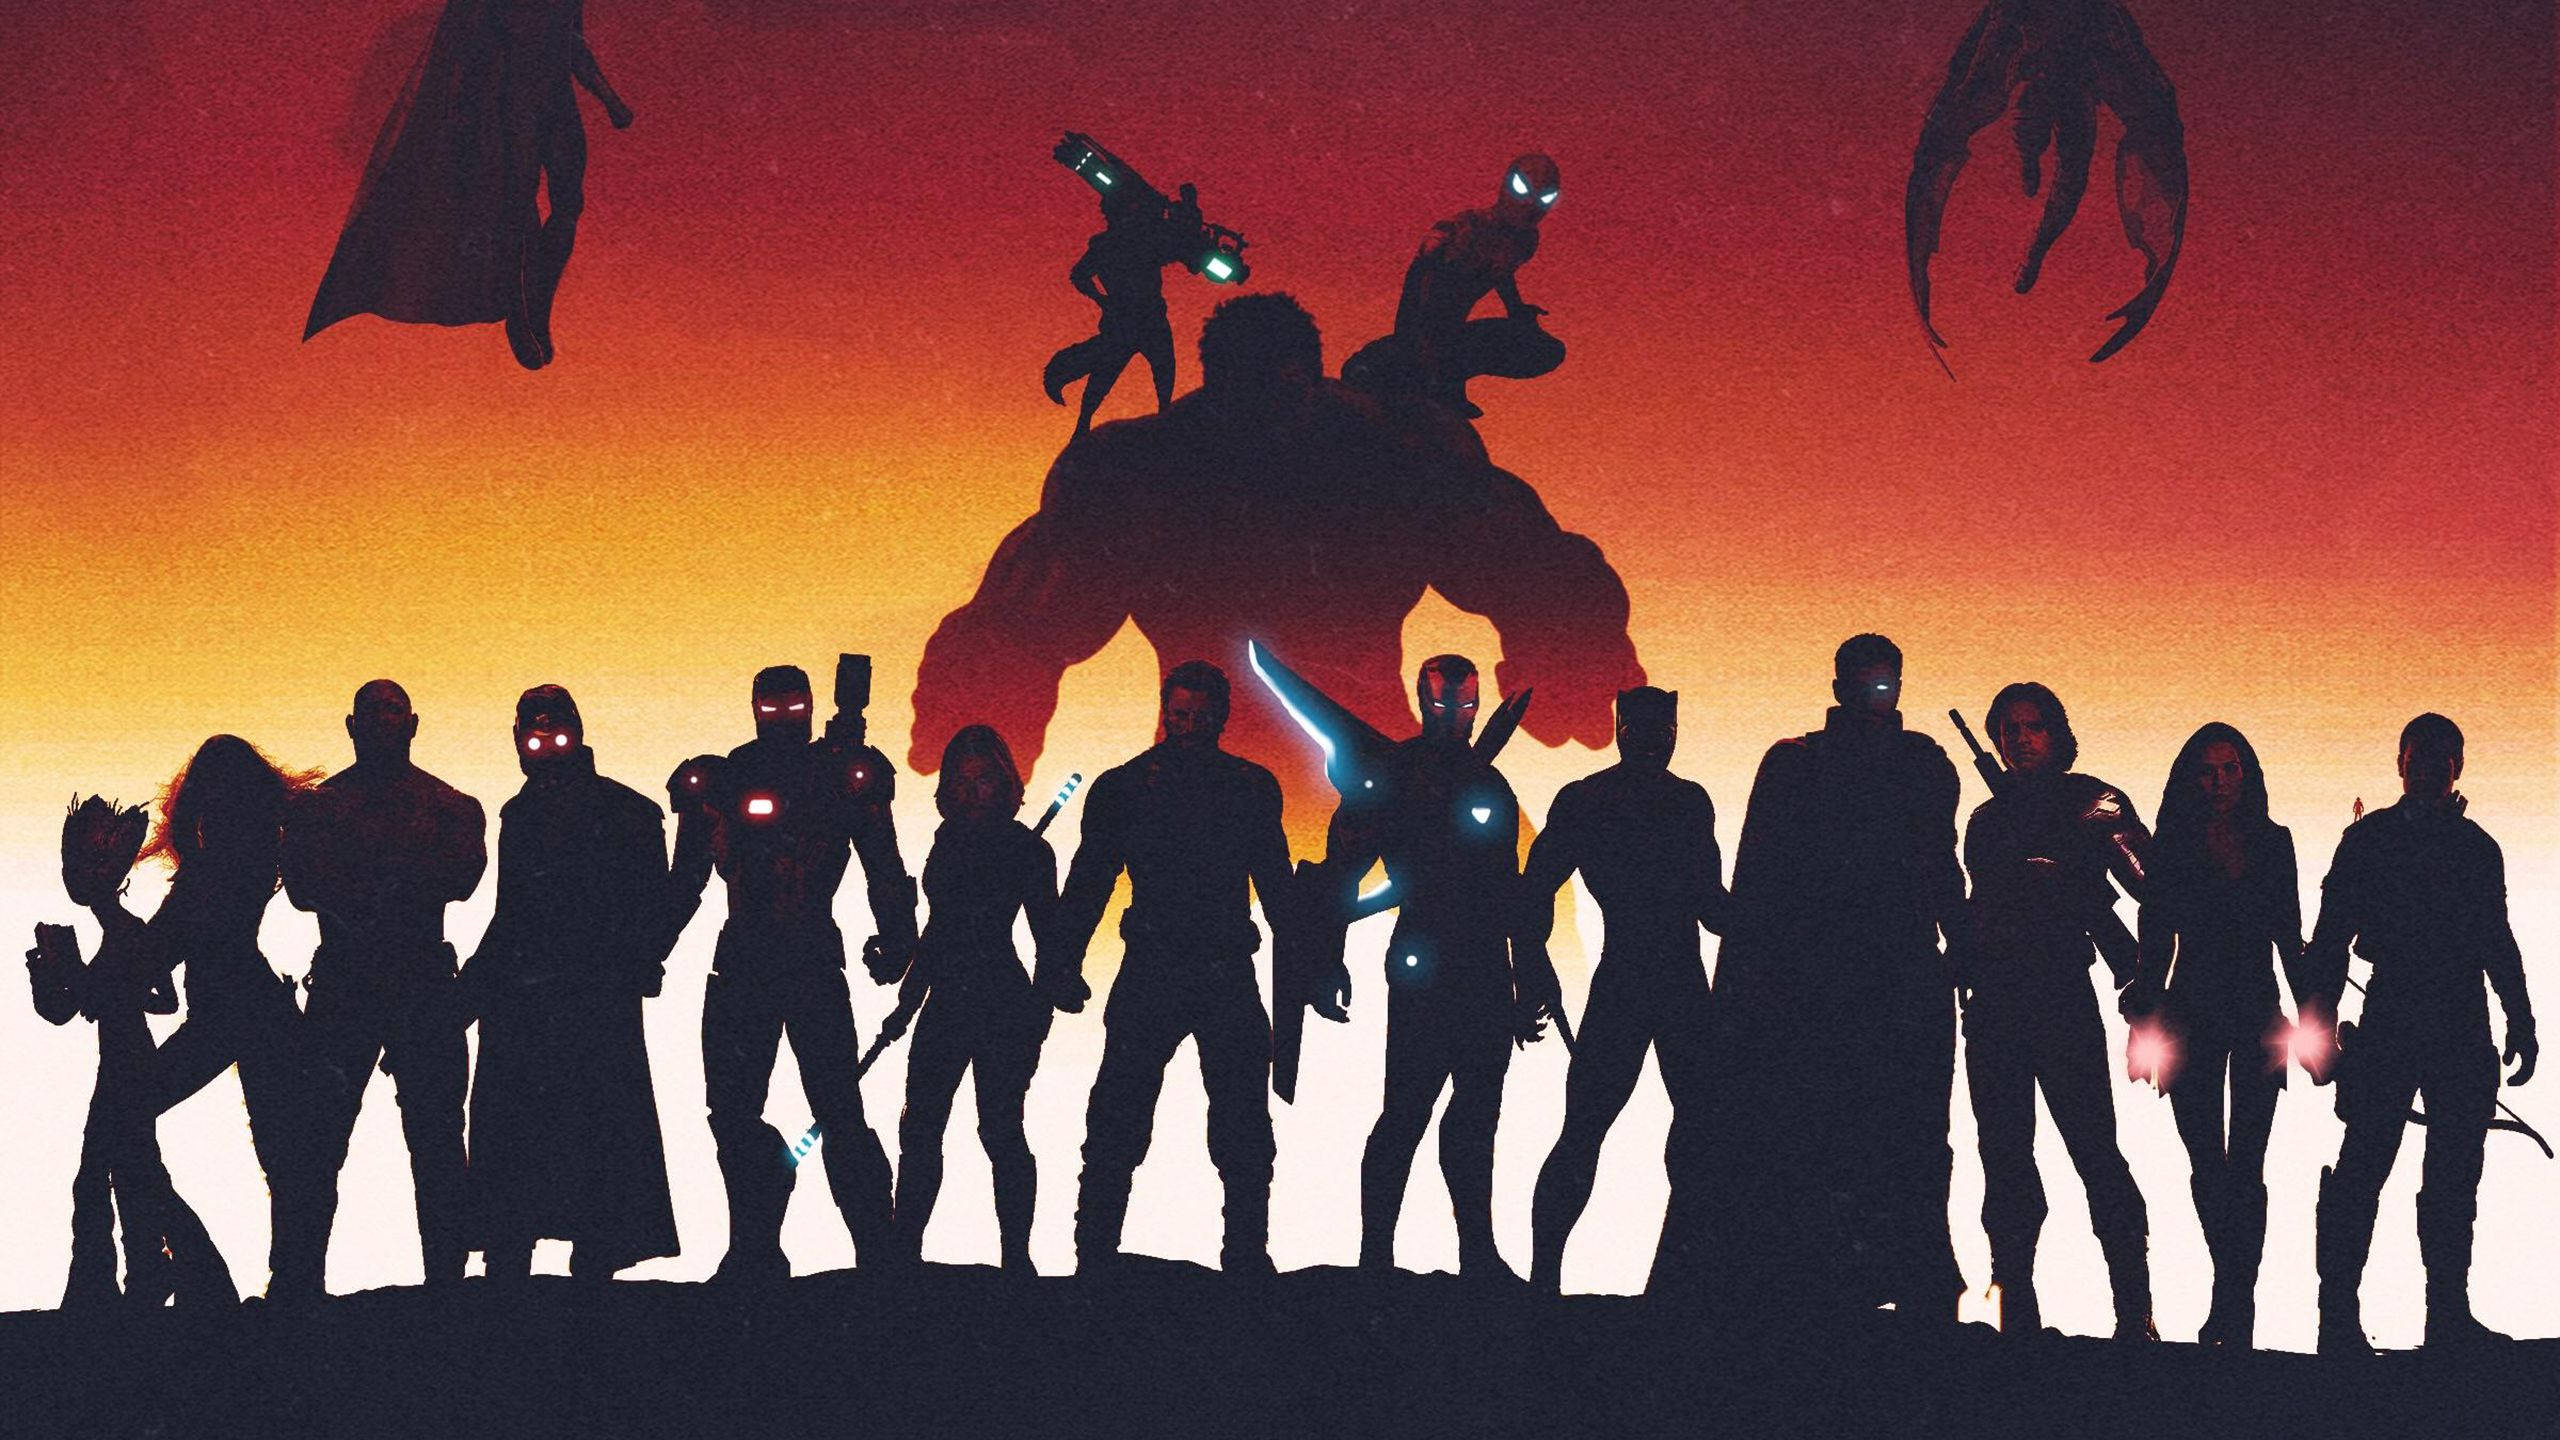 2560x1440 Marvel Heroes Silhouettes Wallpaper